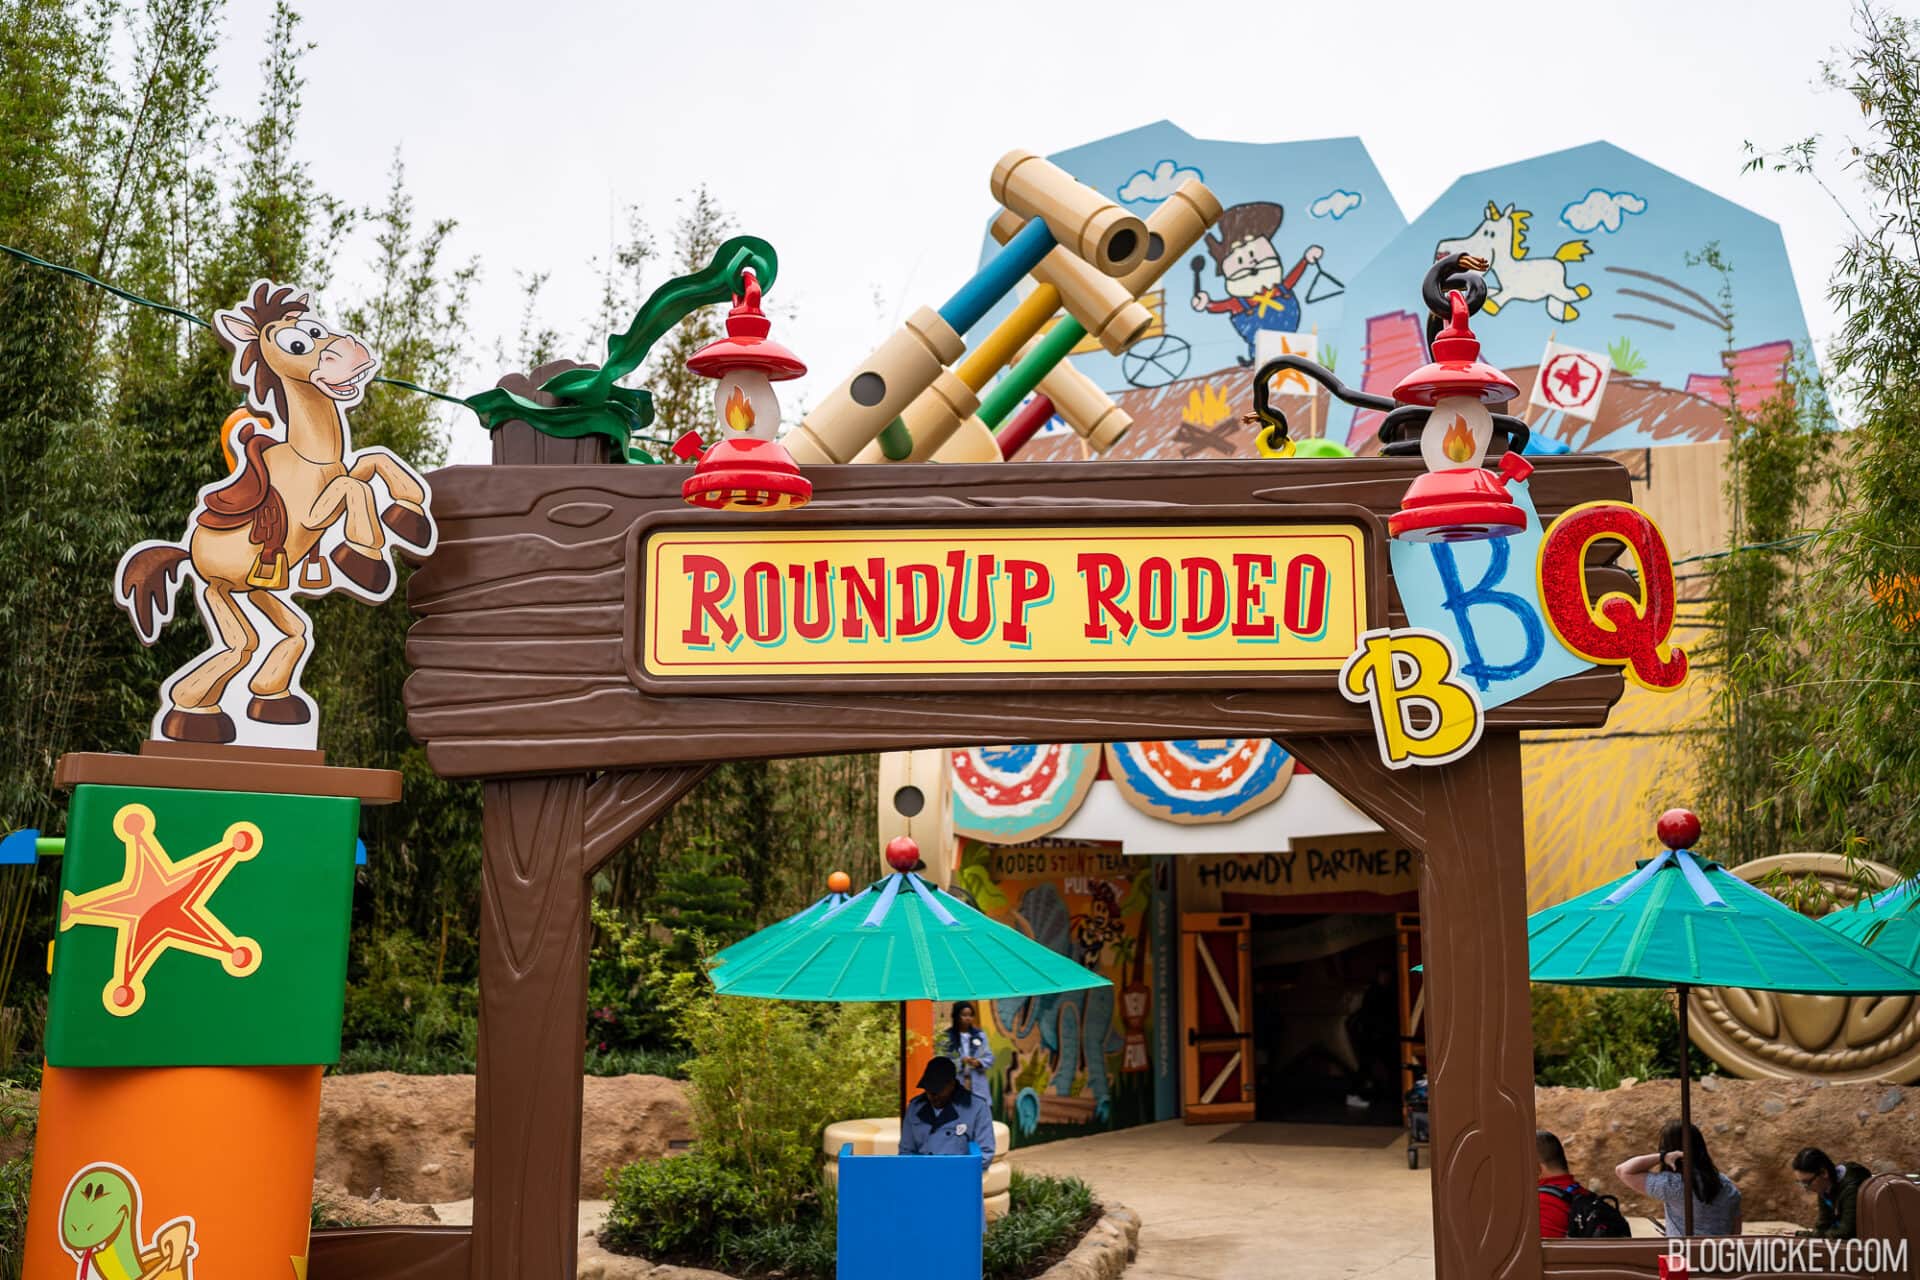 roundup-rodeo-sign-revealed-1-1920x1280.jpg